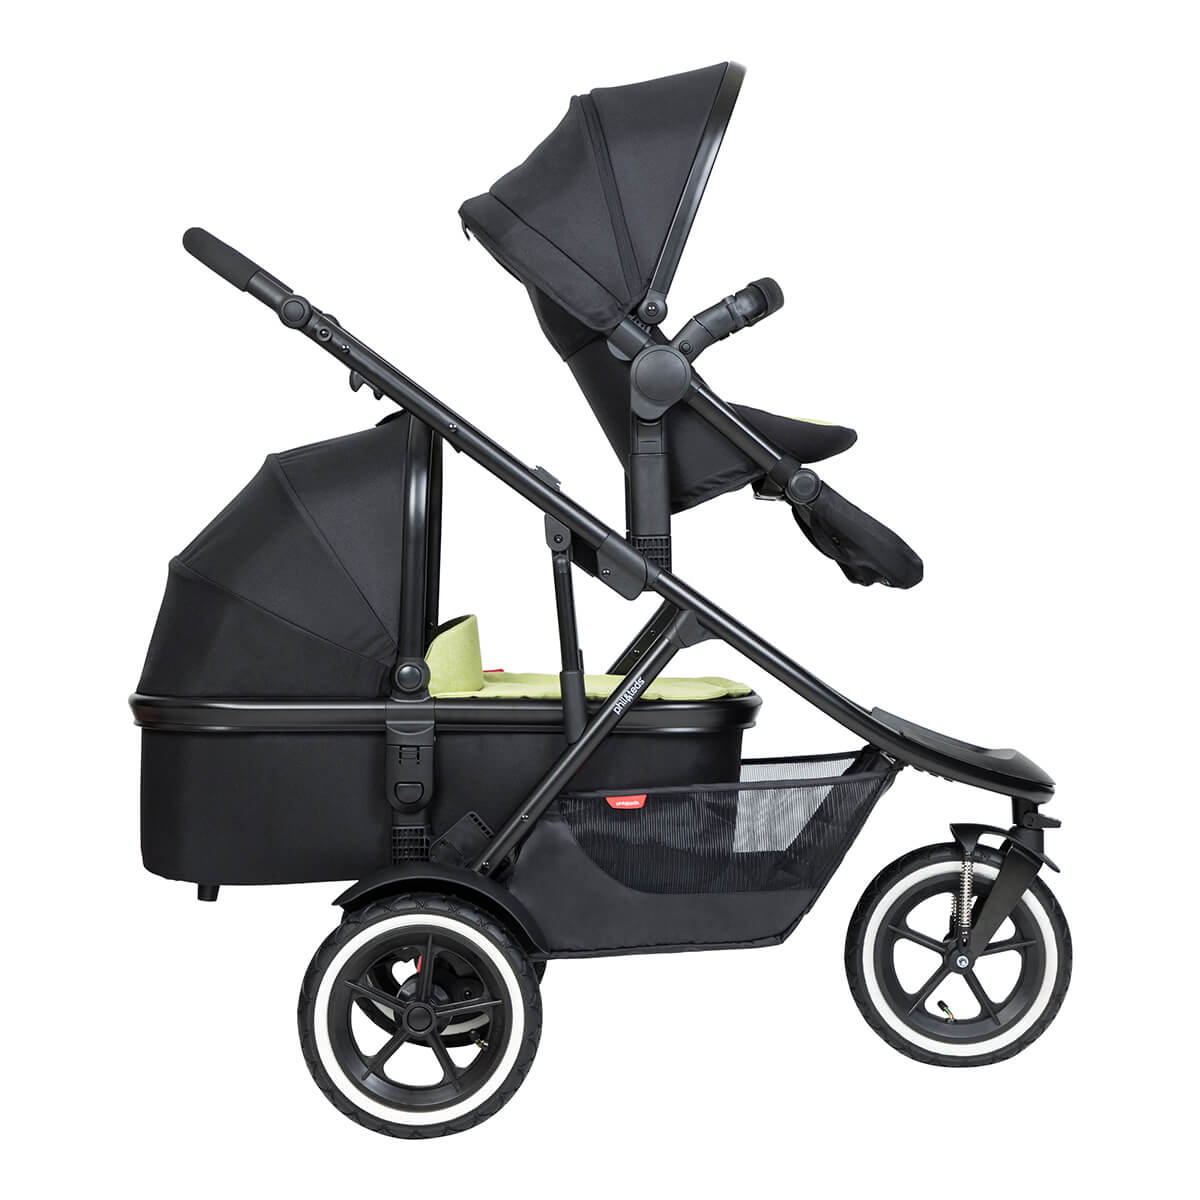 https://cdn.accentuate.io/4509528653912/19272668282968/philteds-sport-poussette-with-double-kit-extended-clip-and-snug-carrycot-side-view-v1626484552796.jpg?1200x1200